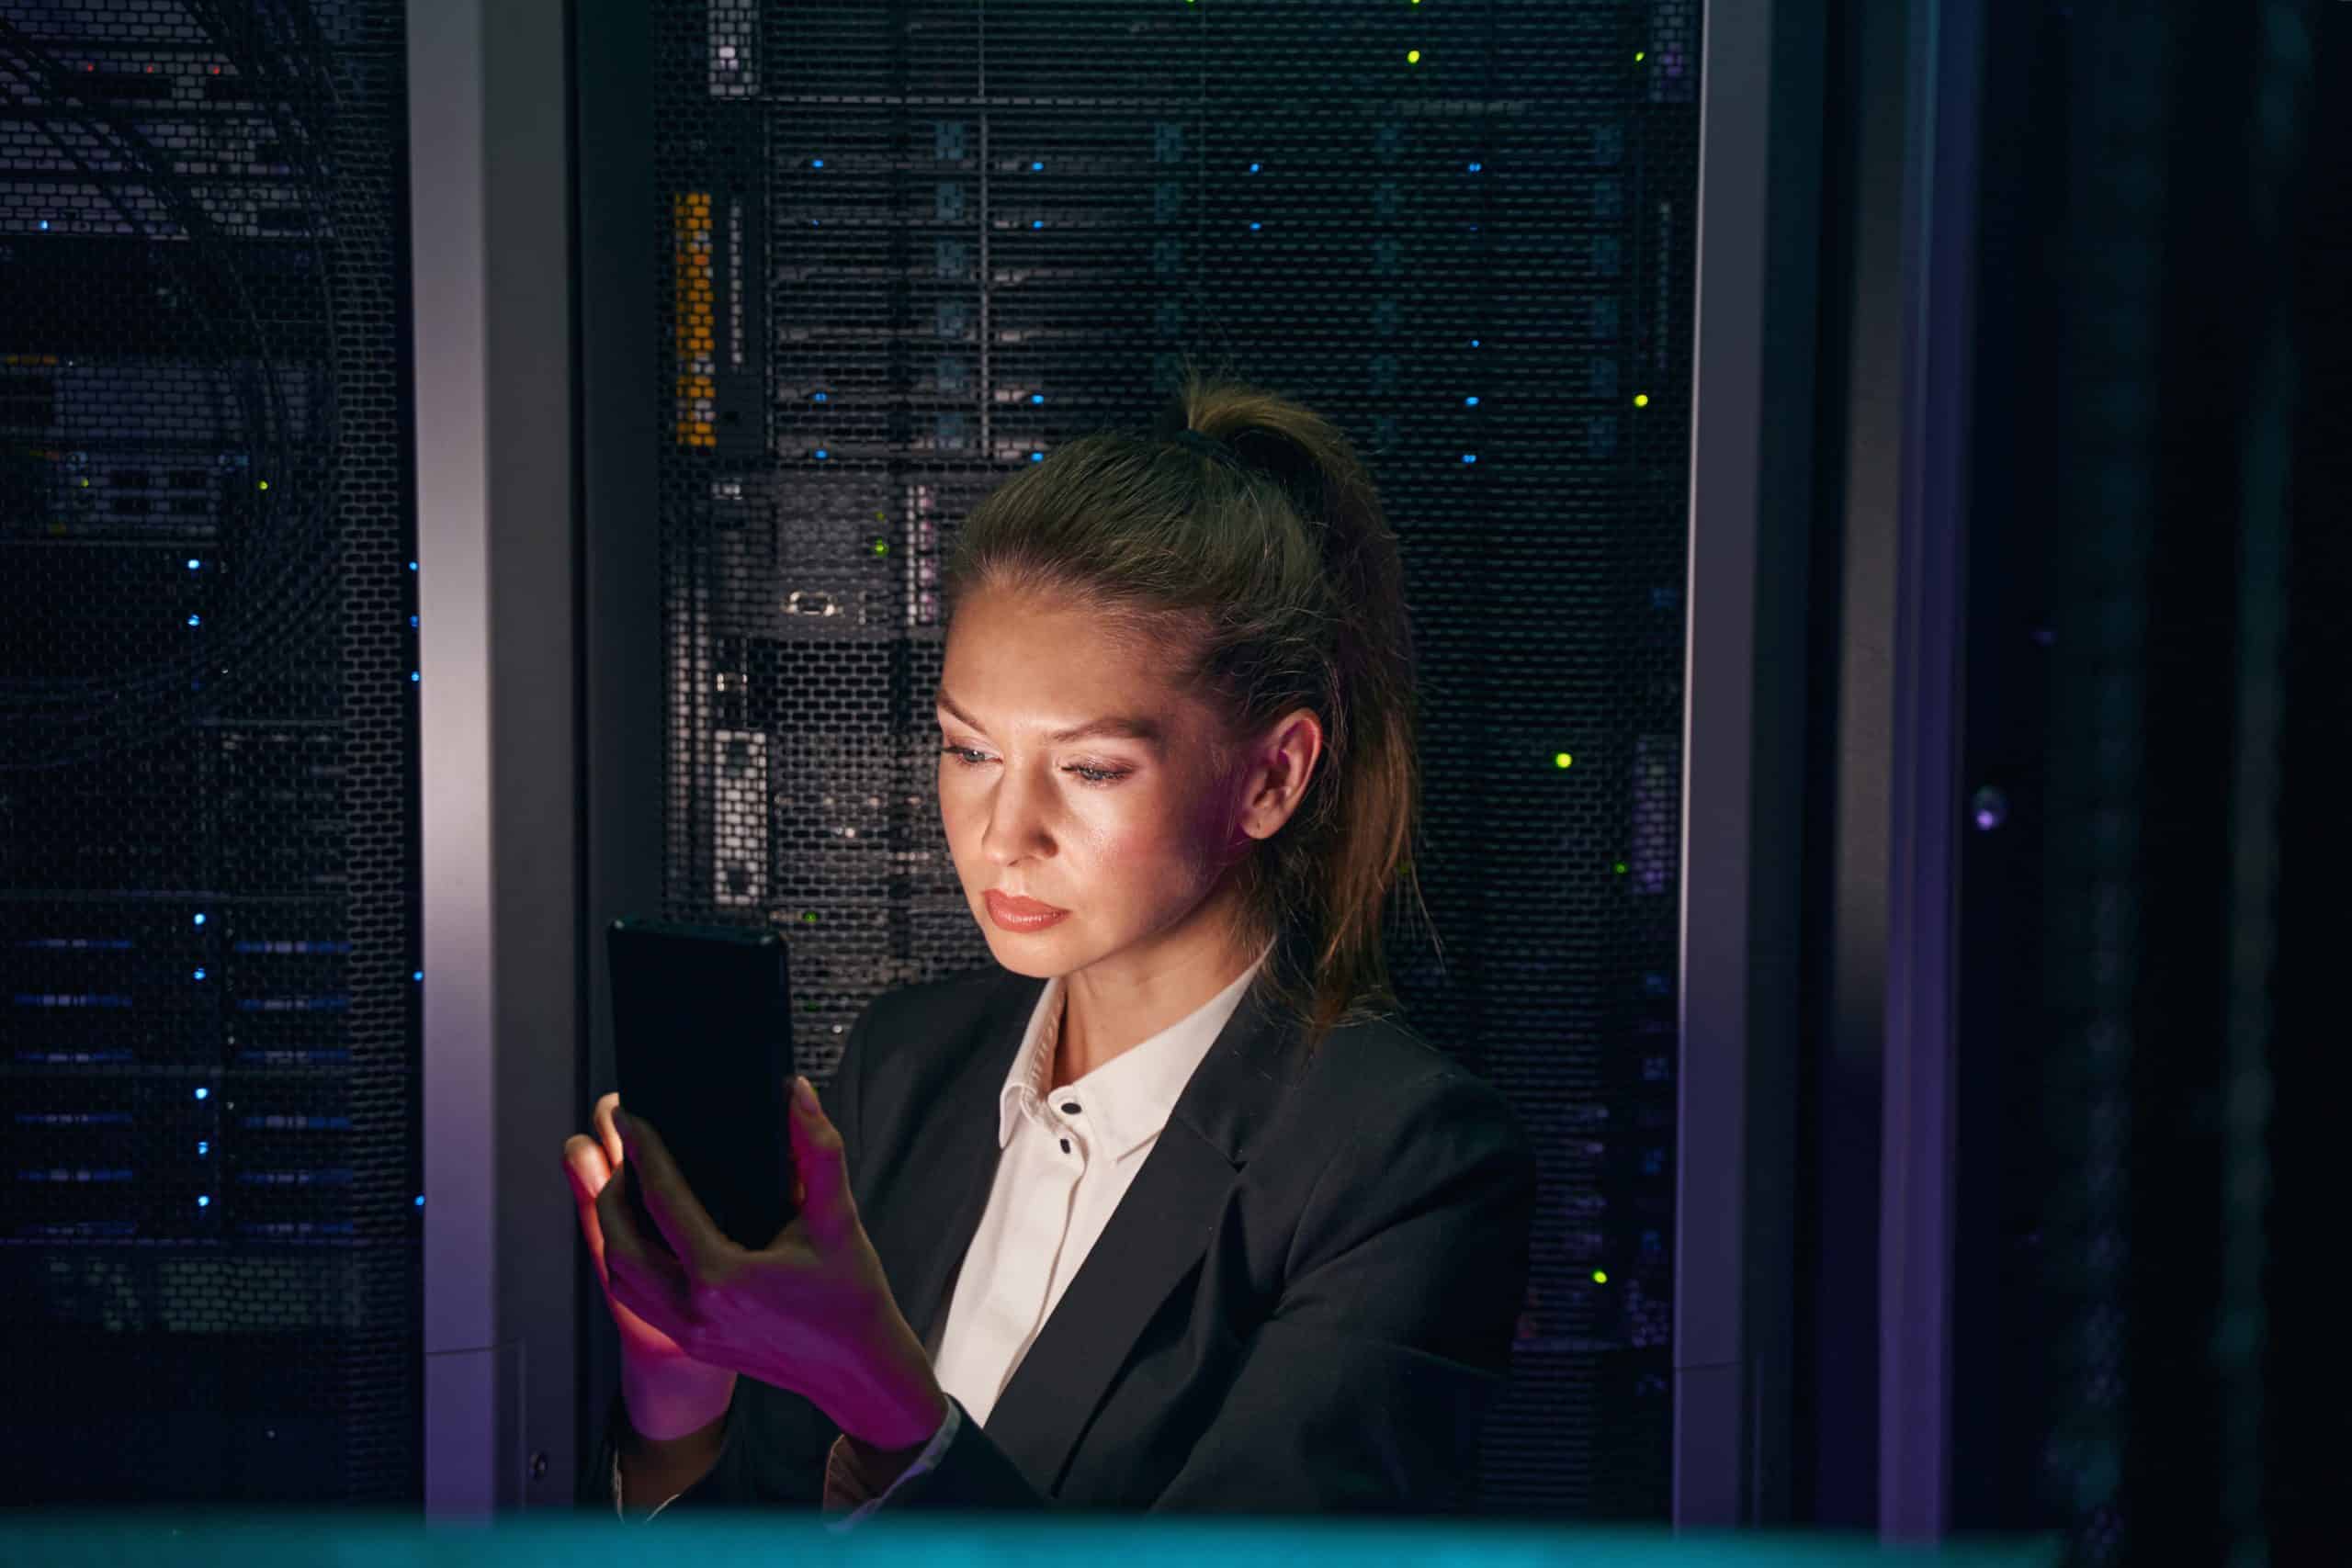 Photo of confident businesswoman using cellphone while working with supercomputer in data center server room